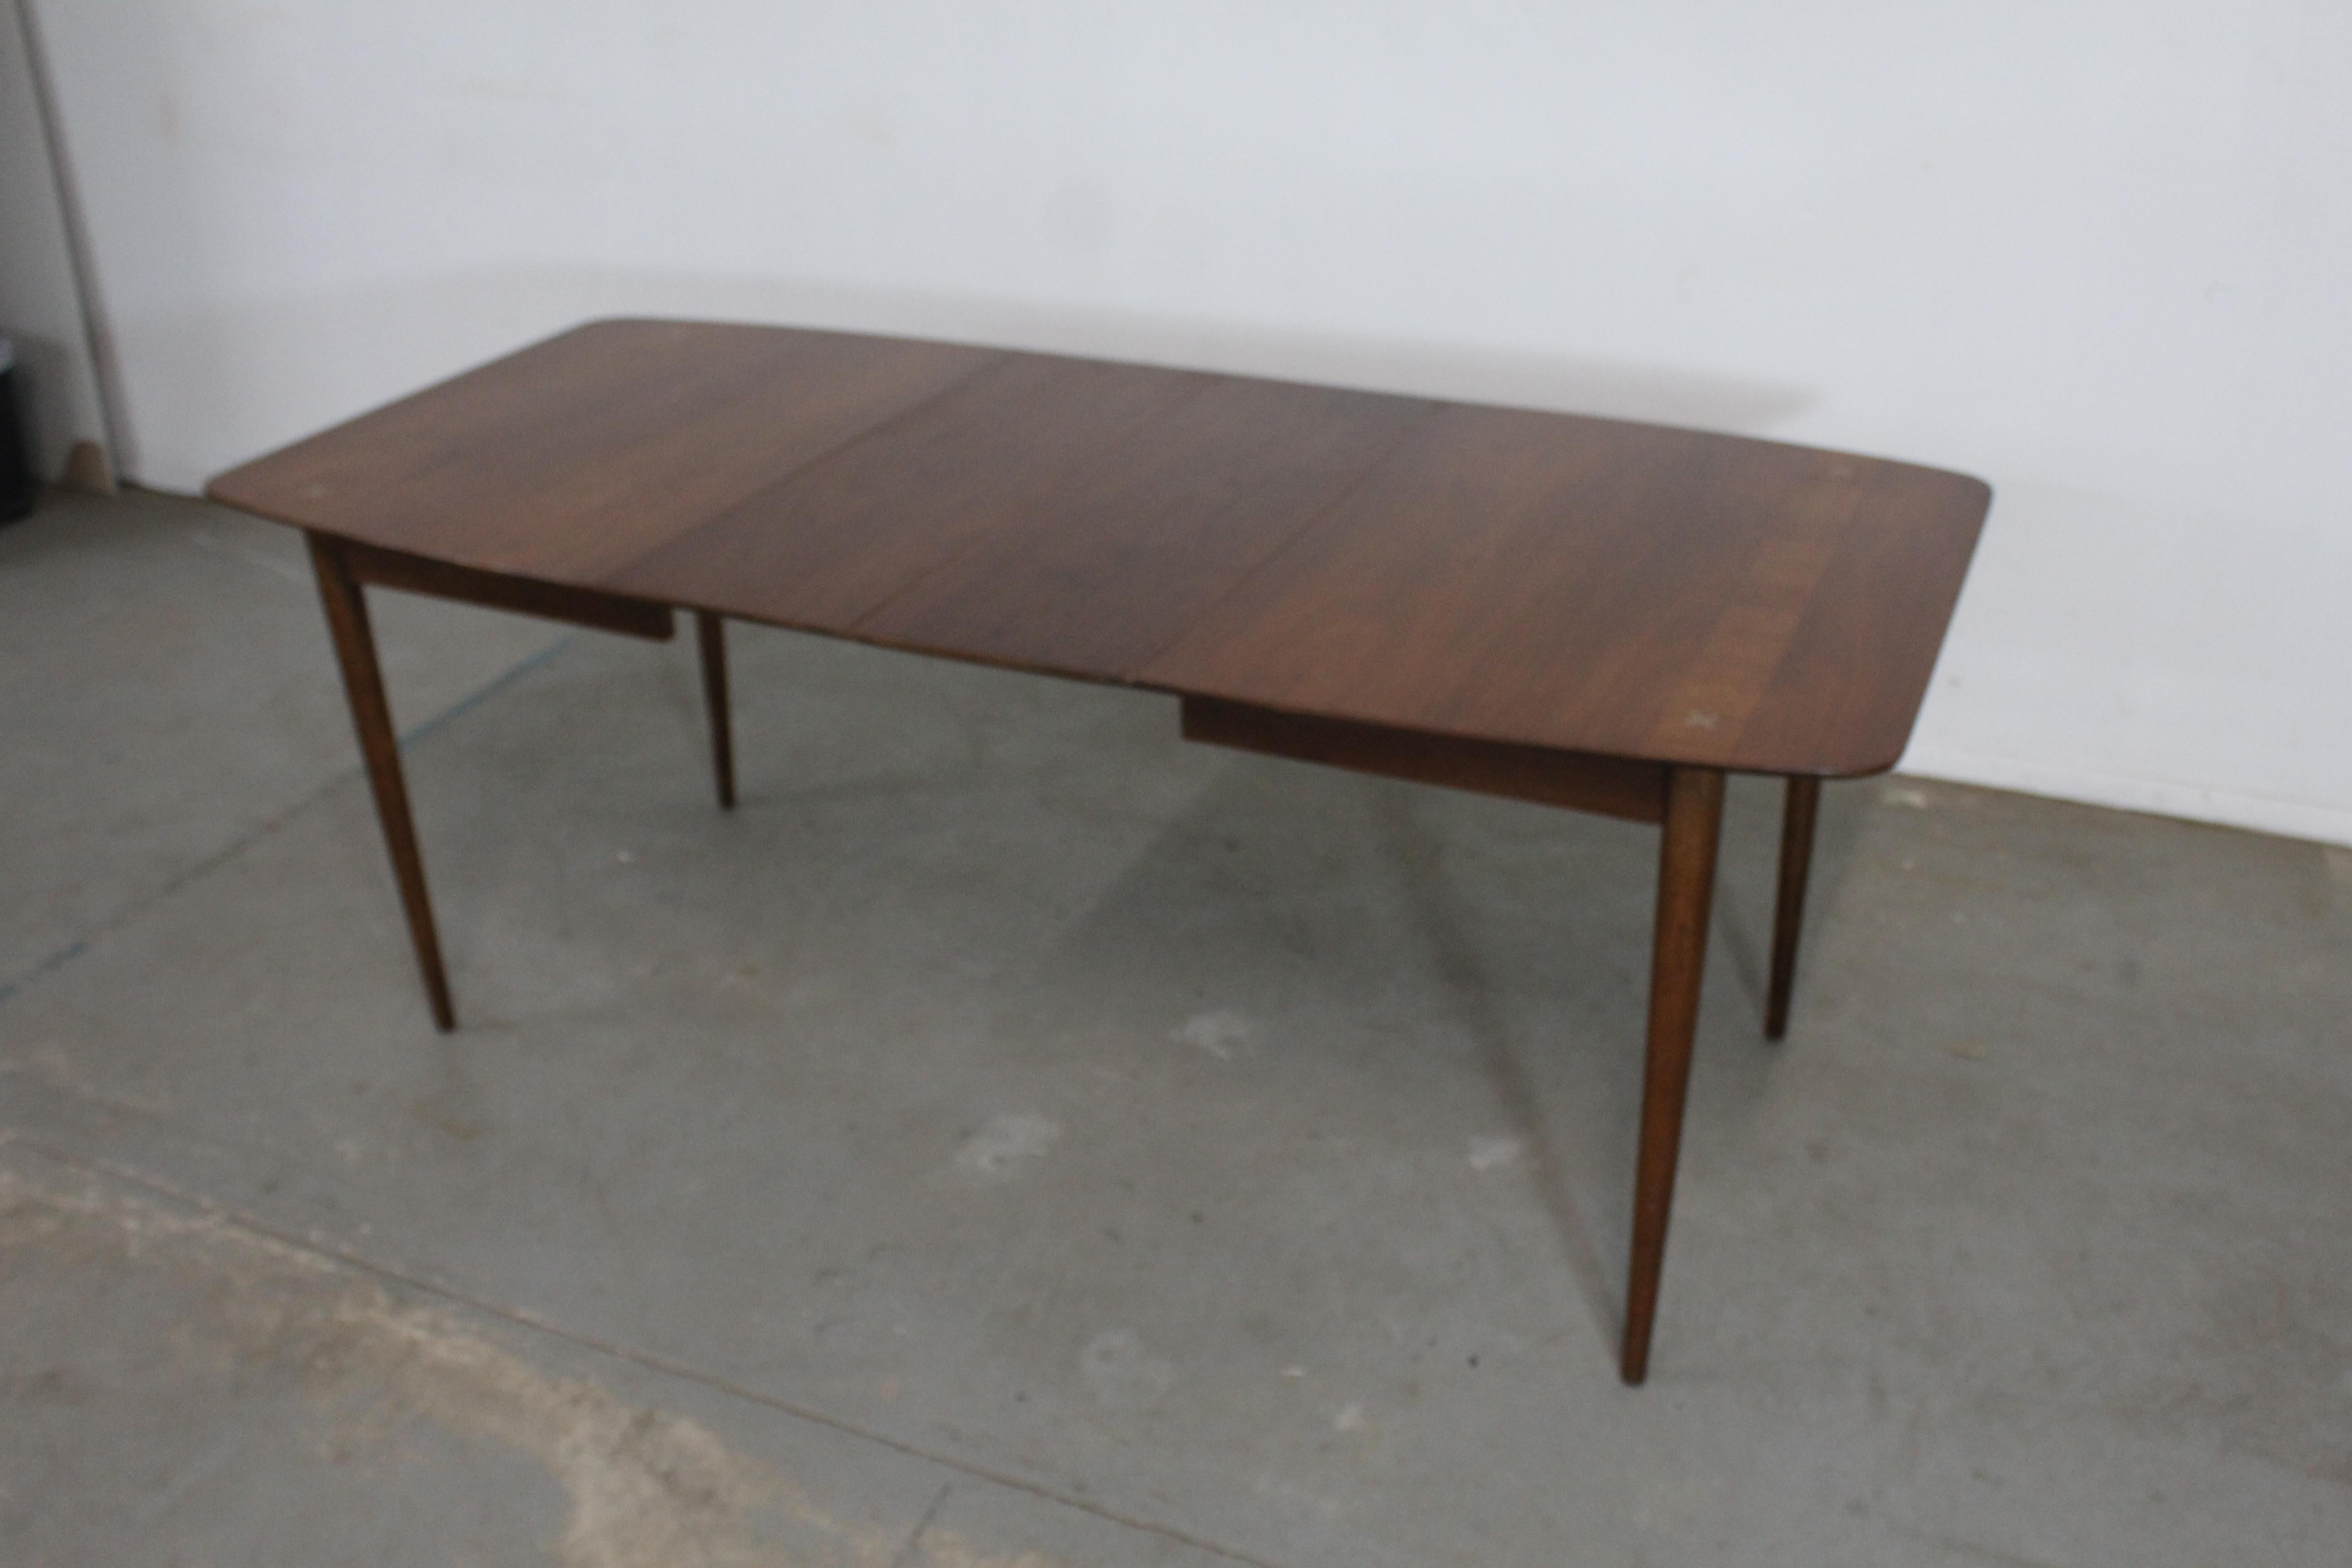 Mid-Century Modern Merton Gershun walnut dining table W 2 extensions
Offered is a Mid-Century Modern Merton Gershun walnut dining table W 2 extensions. The table is by American of Martinsville. This table is prefect for city living or interior